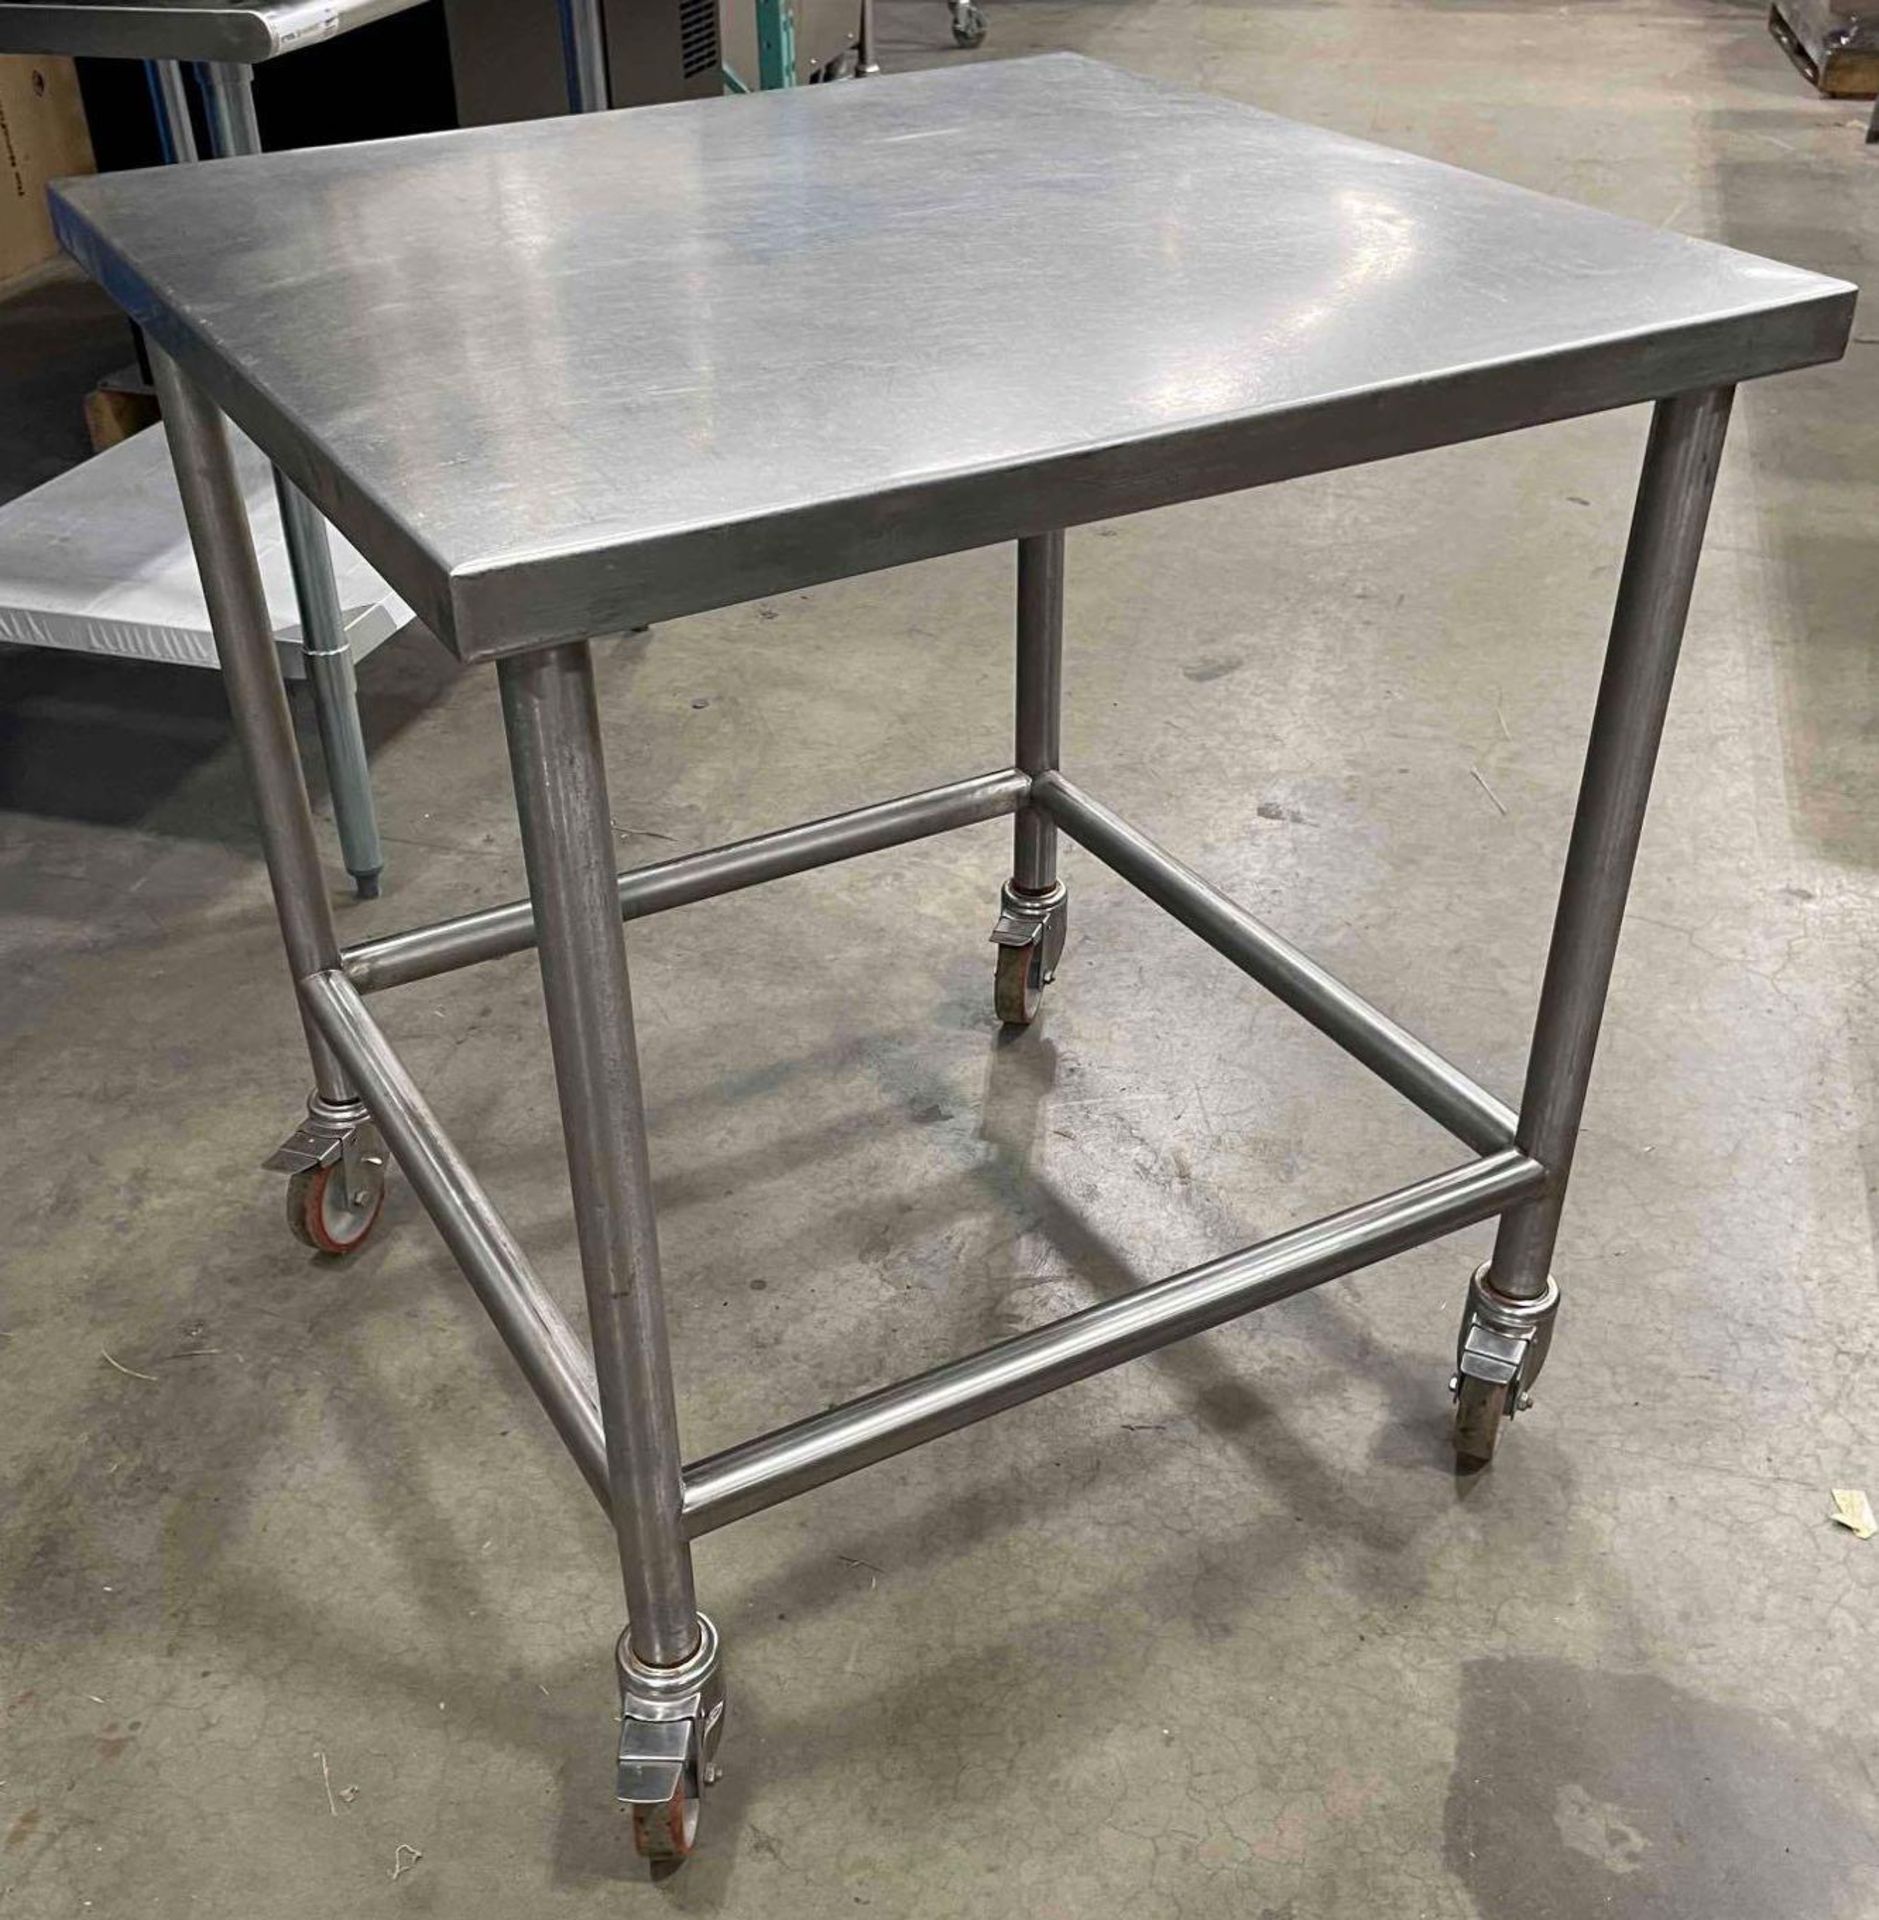 31" X 31" STAINLESS STEEL TABLE ON CASTORS - Image 3 of 3